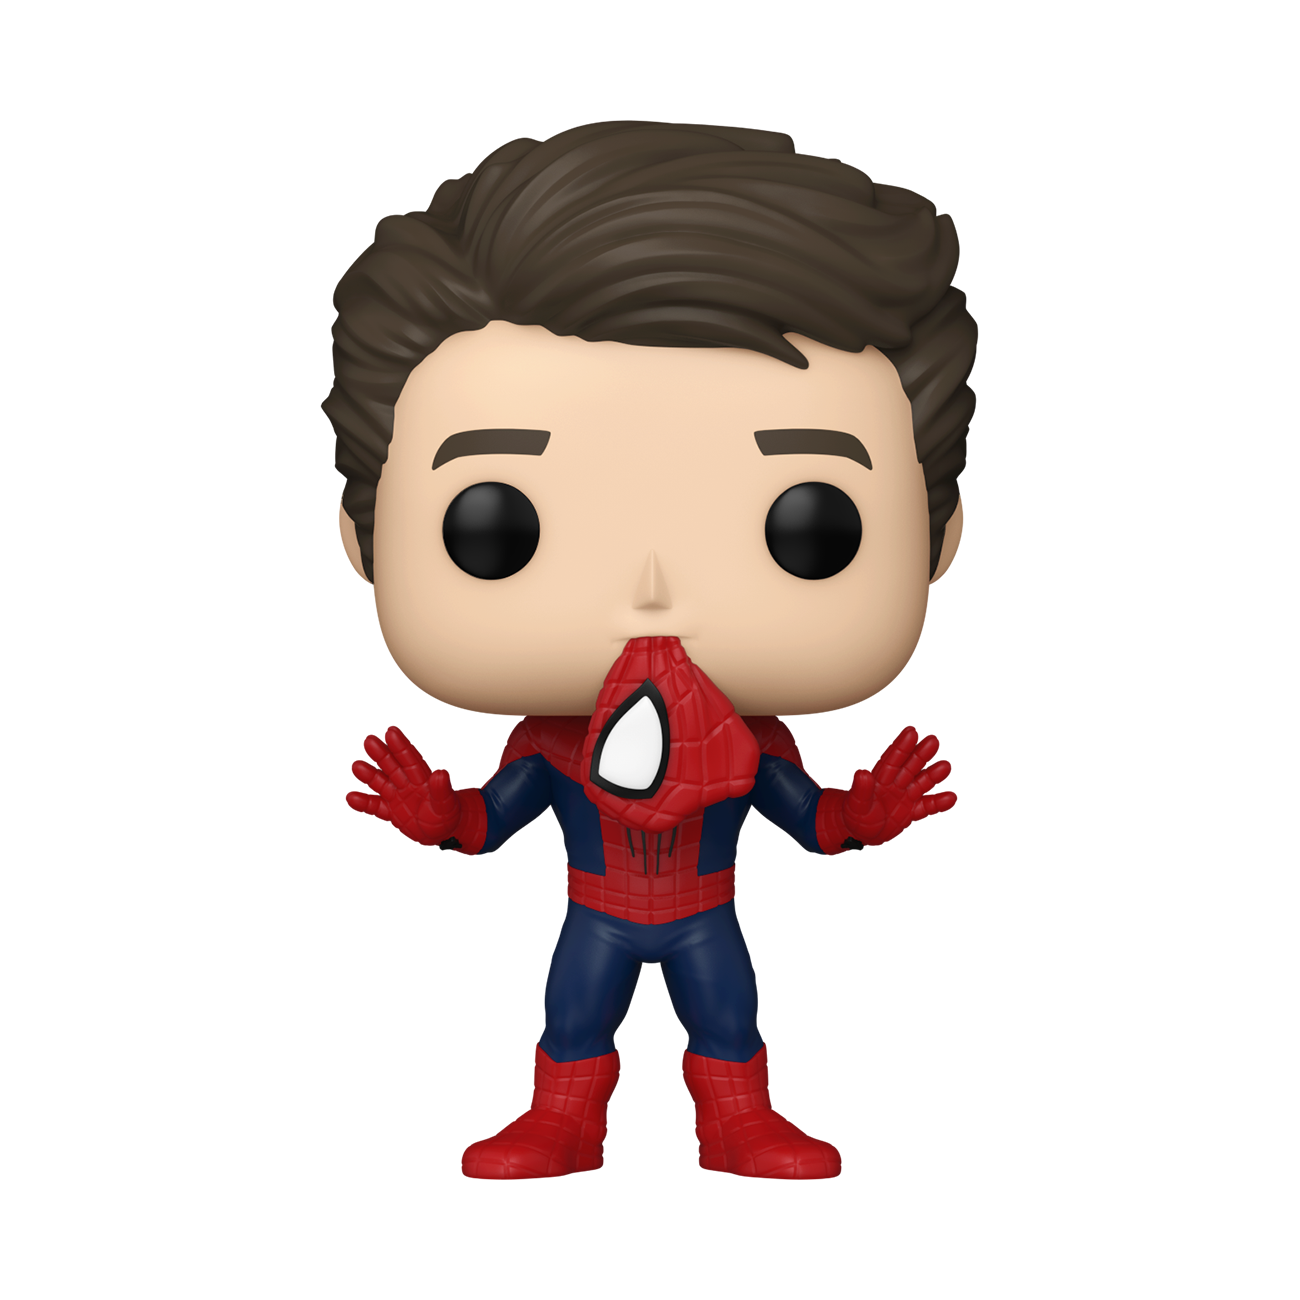 Buy Pop! The Amazing Spider-Man Unmasked at Funko.